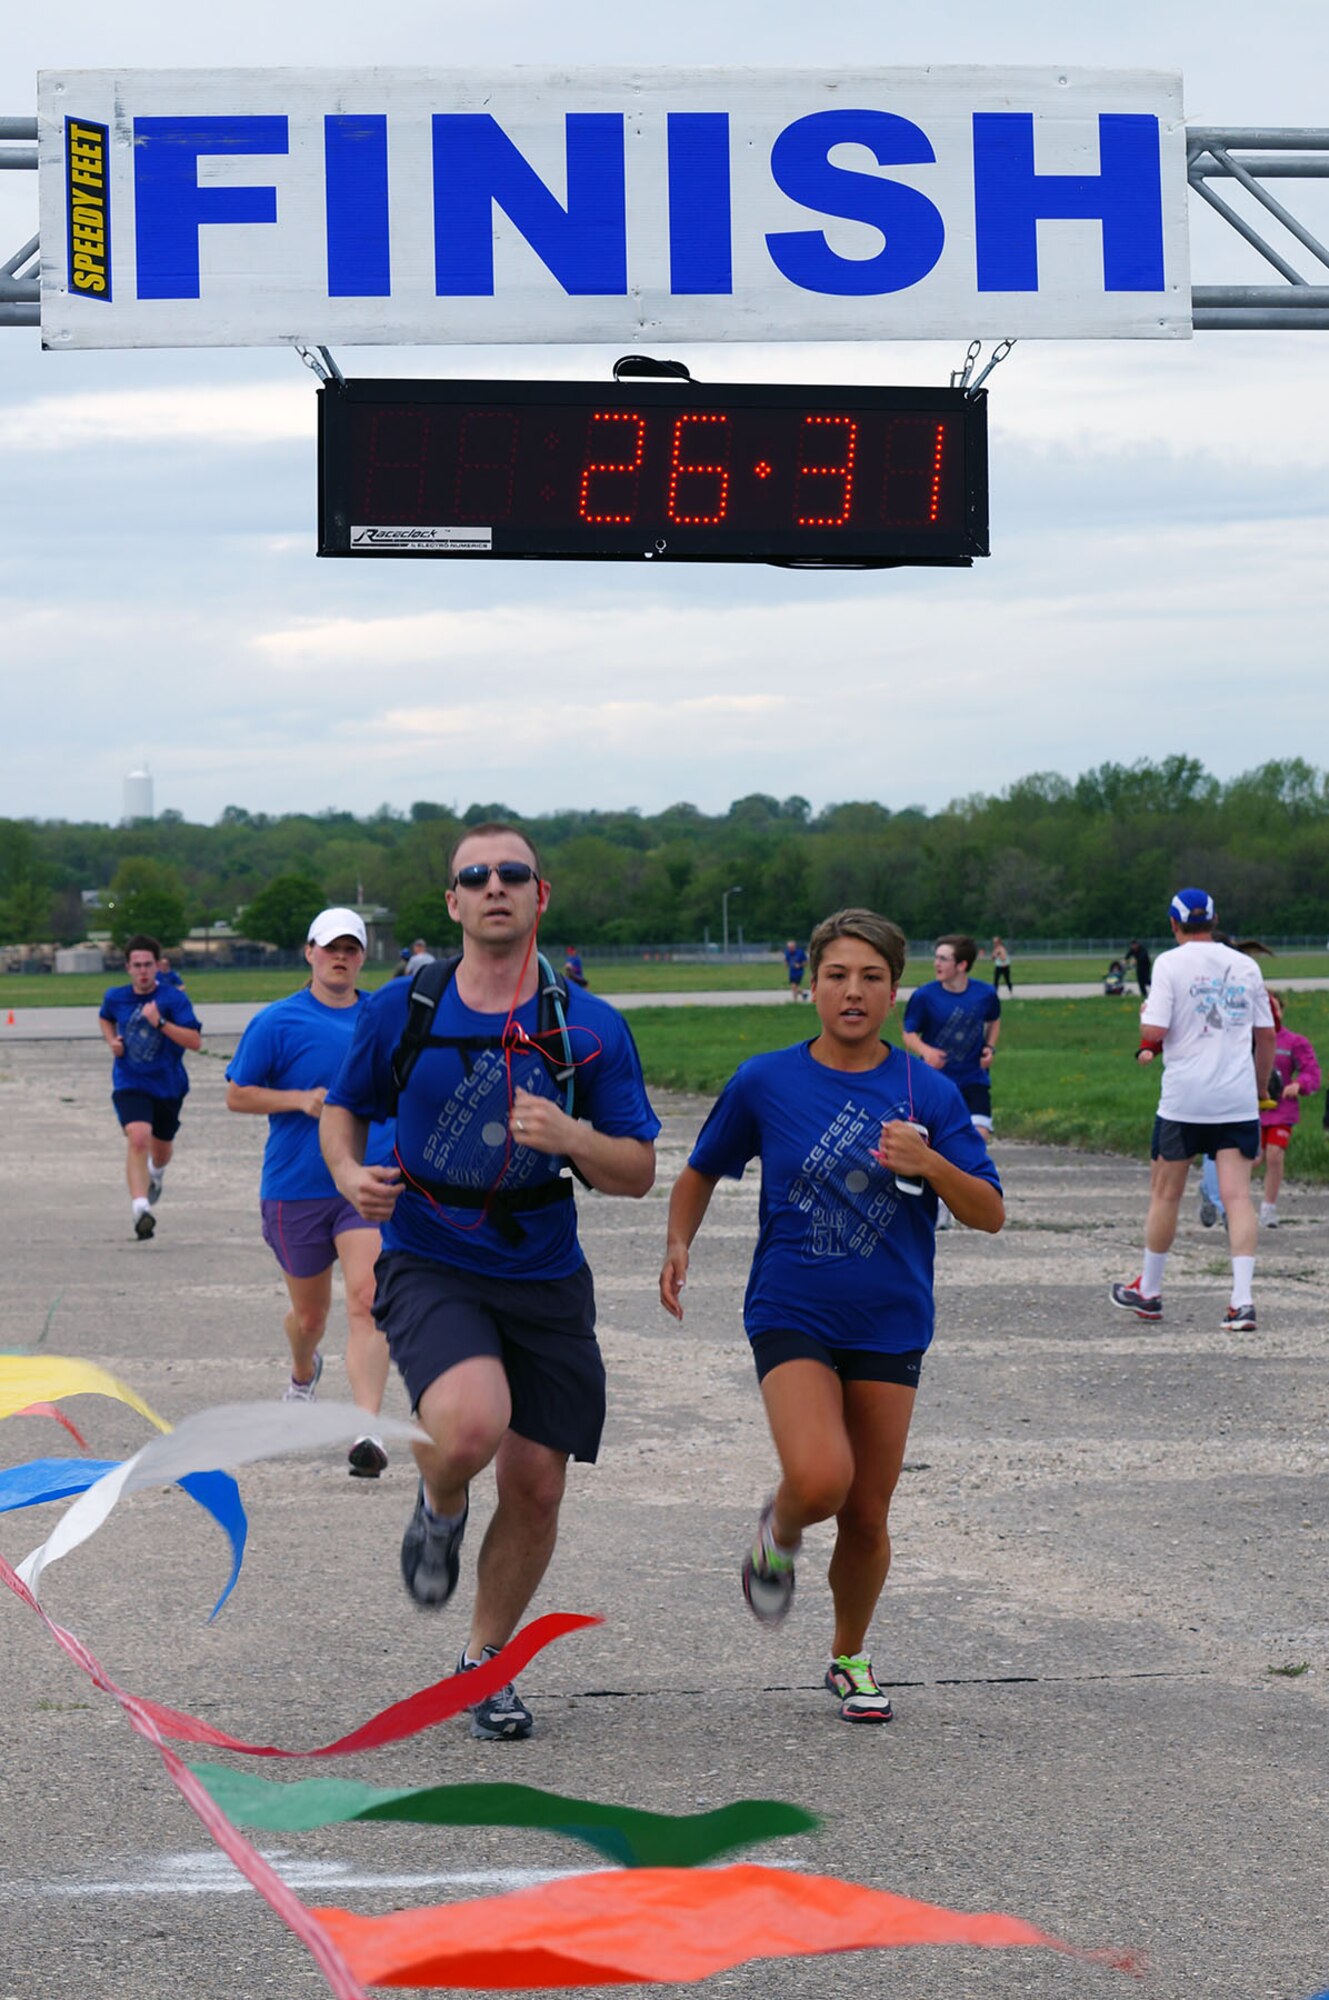 DAYTON, Ohio (05/2013) -- Participants finish a 5K through a scale-version of the solar system during Space Fest on May 4 at the National Museum of the U.S. Air Force. (U.S. Air Force photo by Valerie Kulesza)